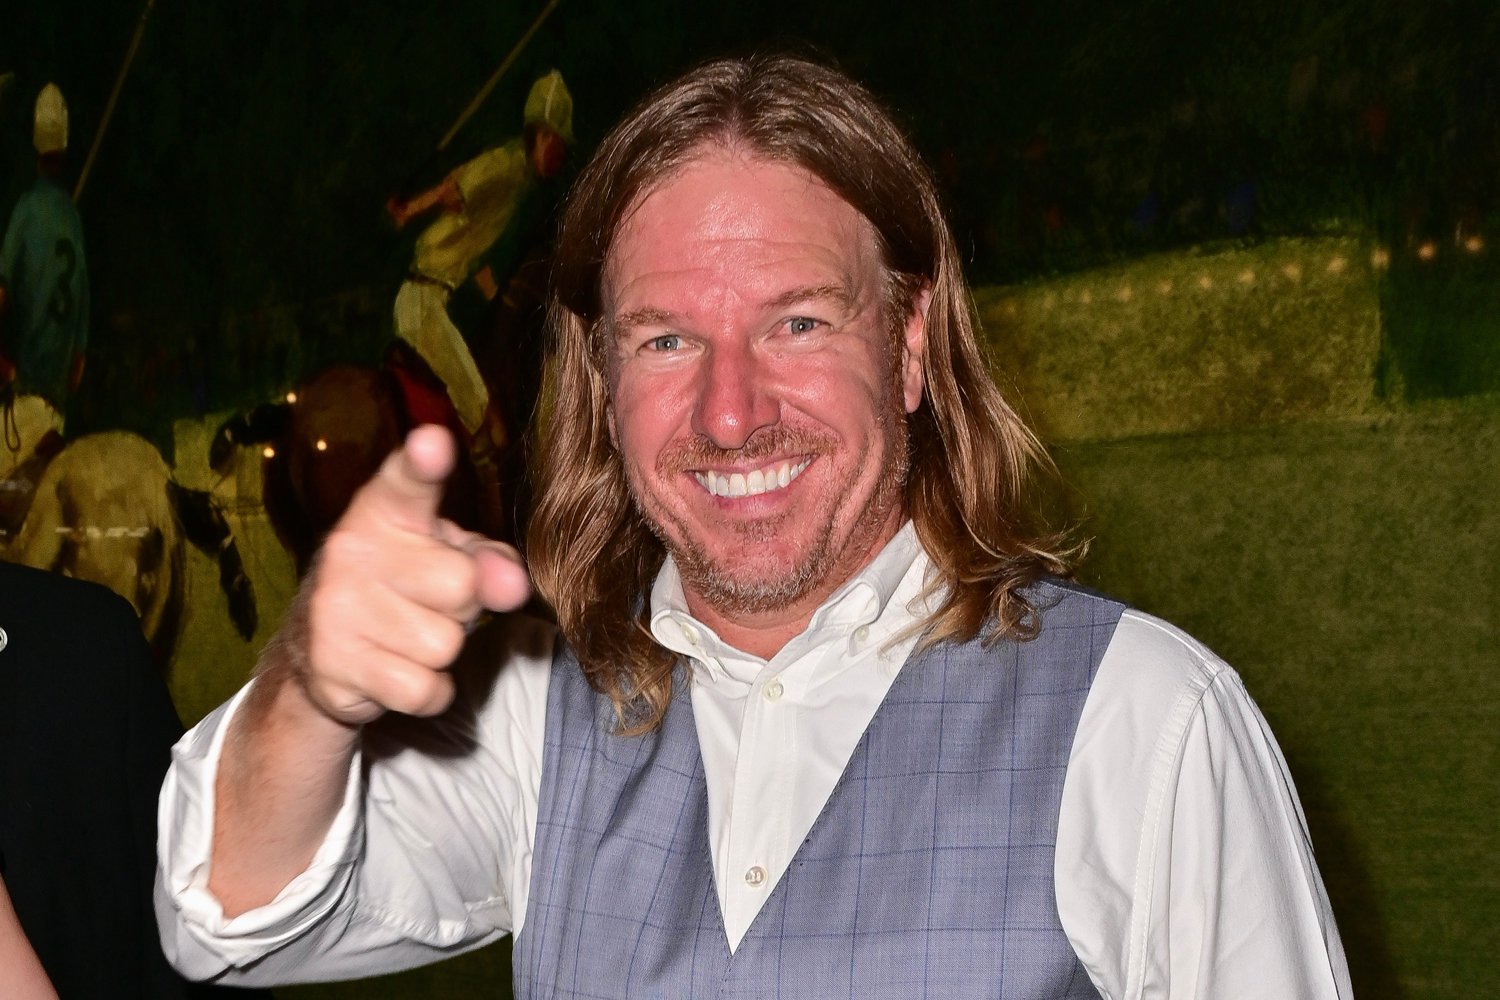 Chip Gaines sporting his long hair, smiling and pointing